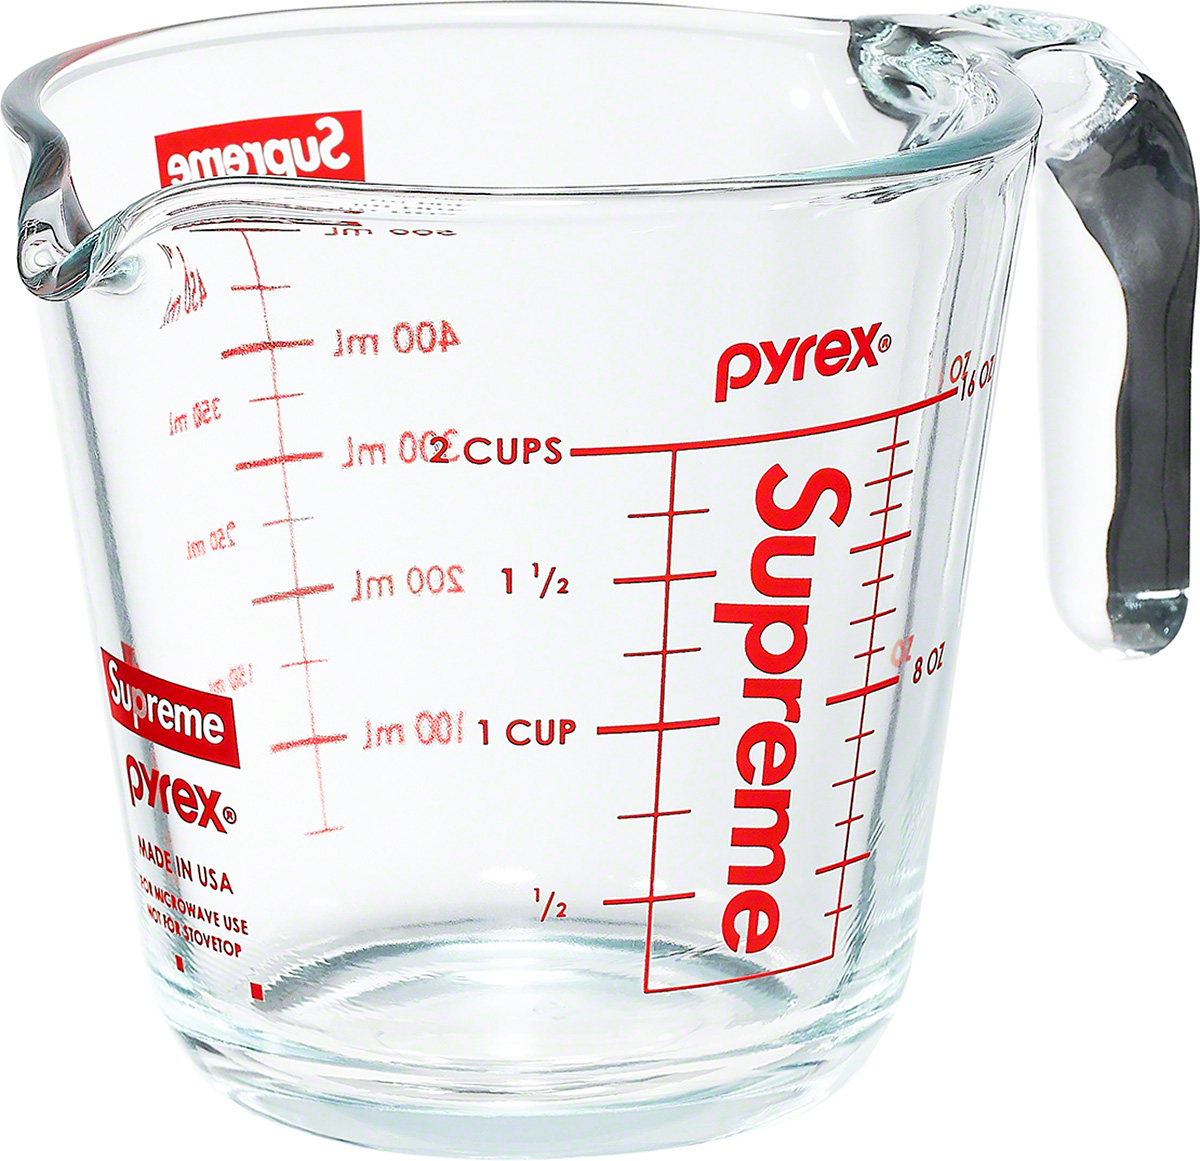 Pyrex Glass Measuring Cups for Sale in Suprstitn Mountain, AZ